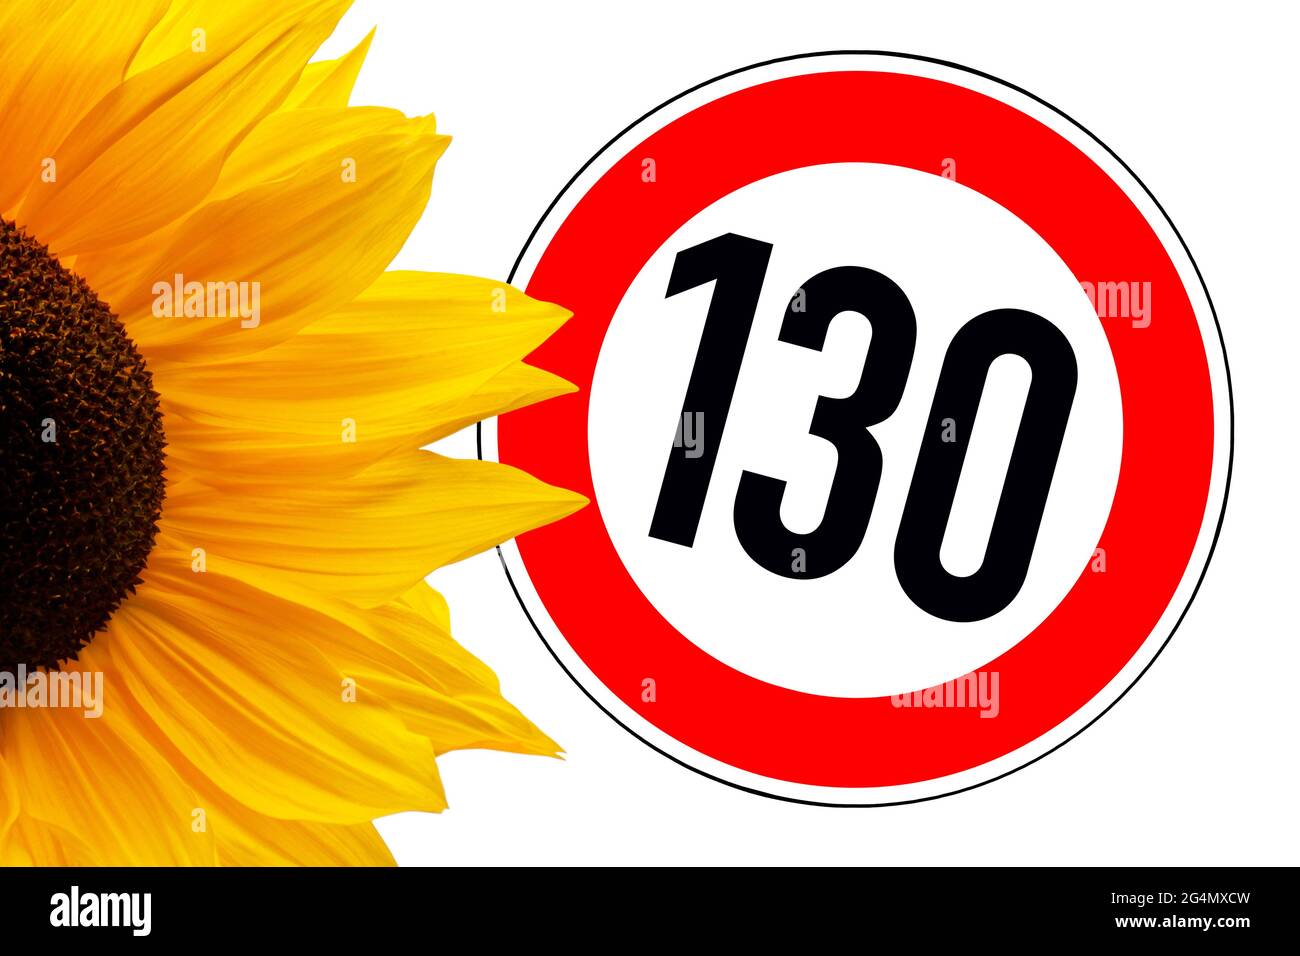 Sunflower and traffic sign speed limit 130 isolated on white background Stock Photo